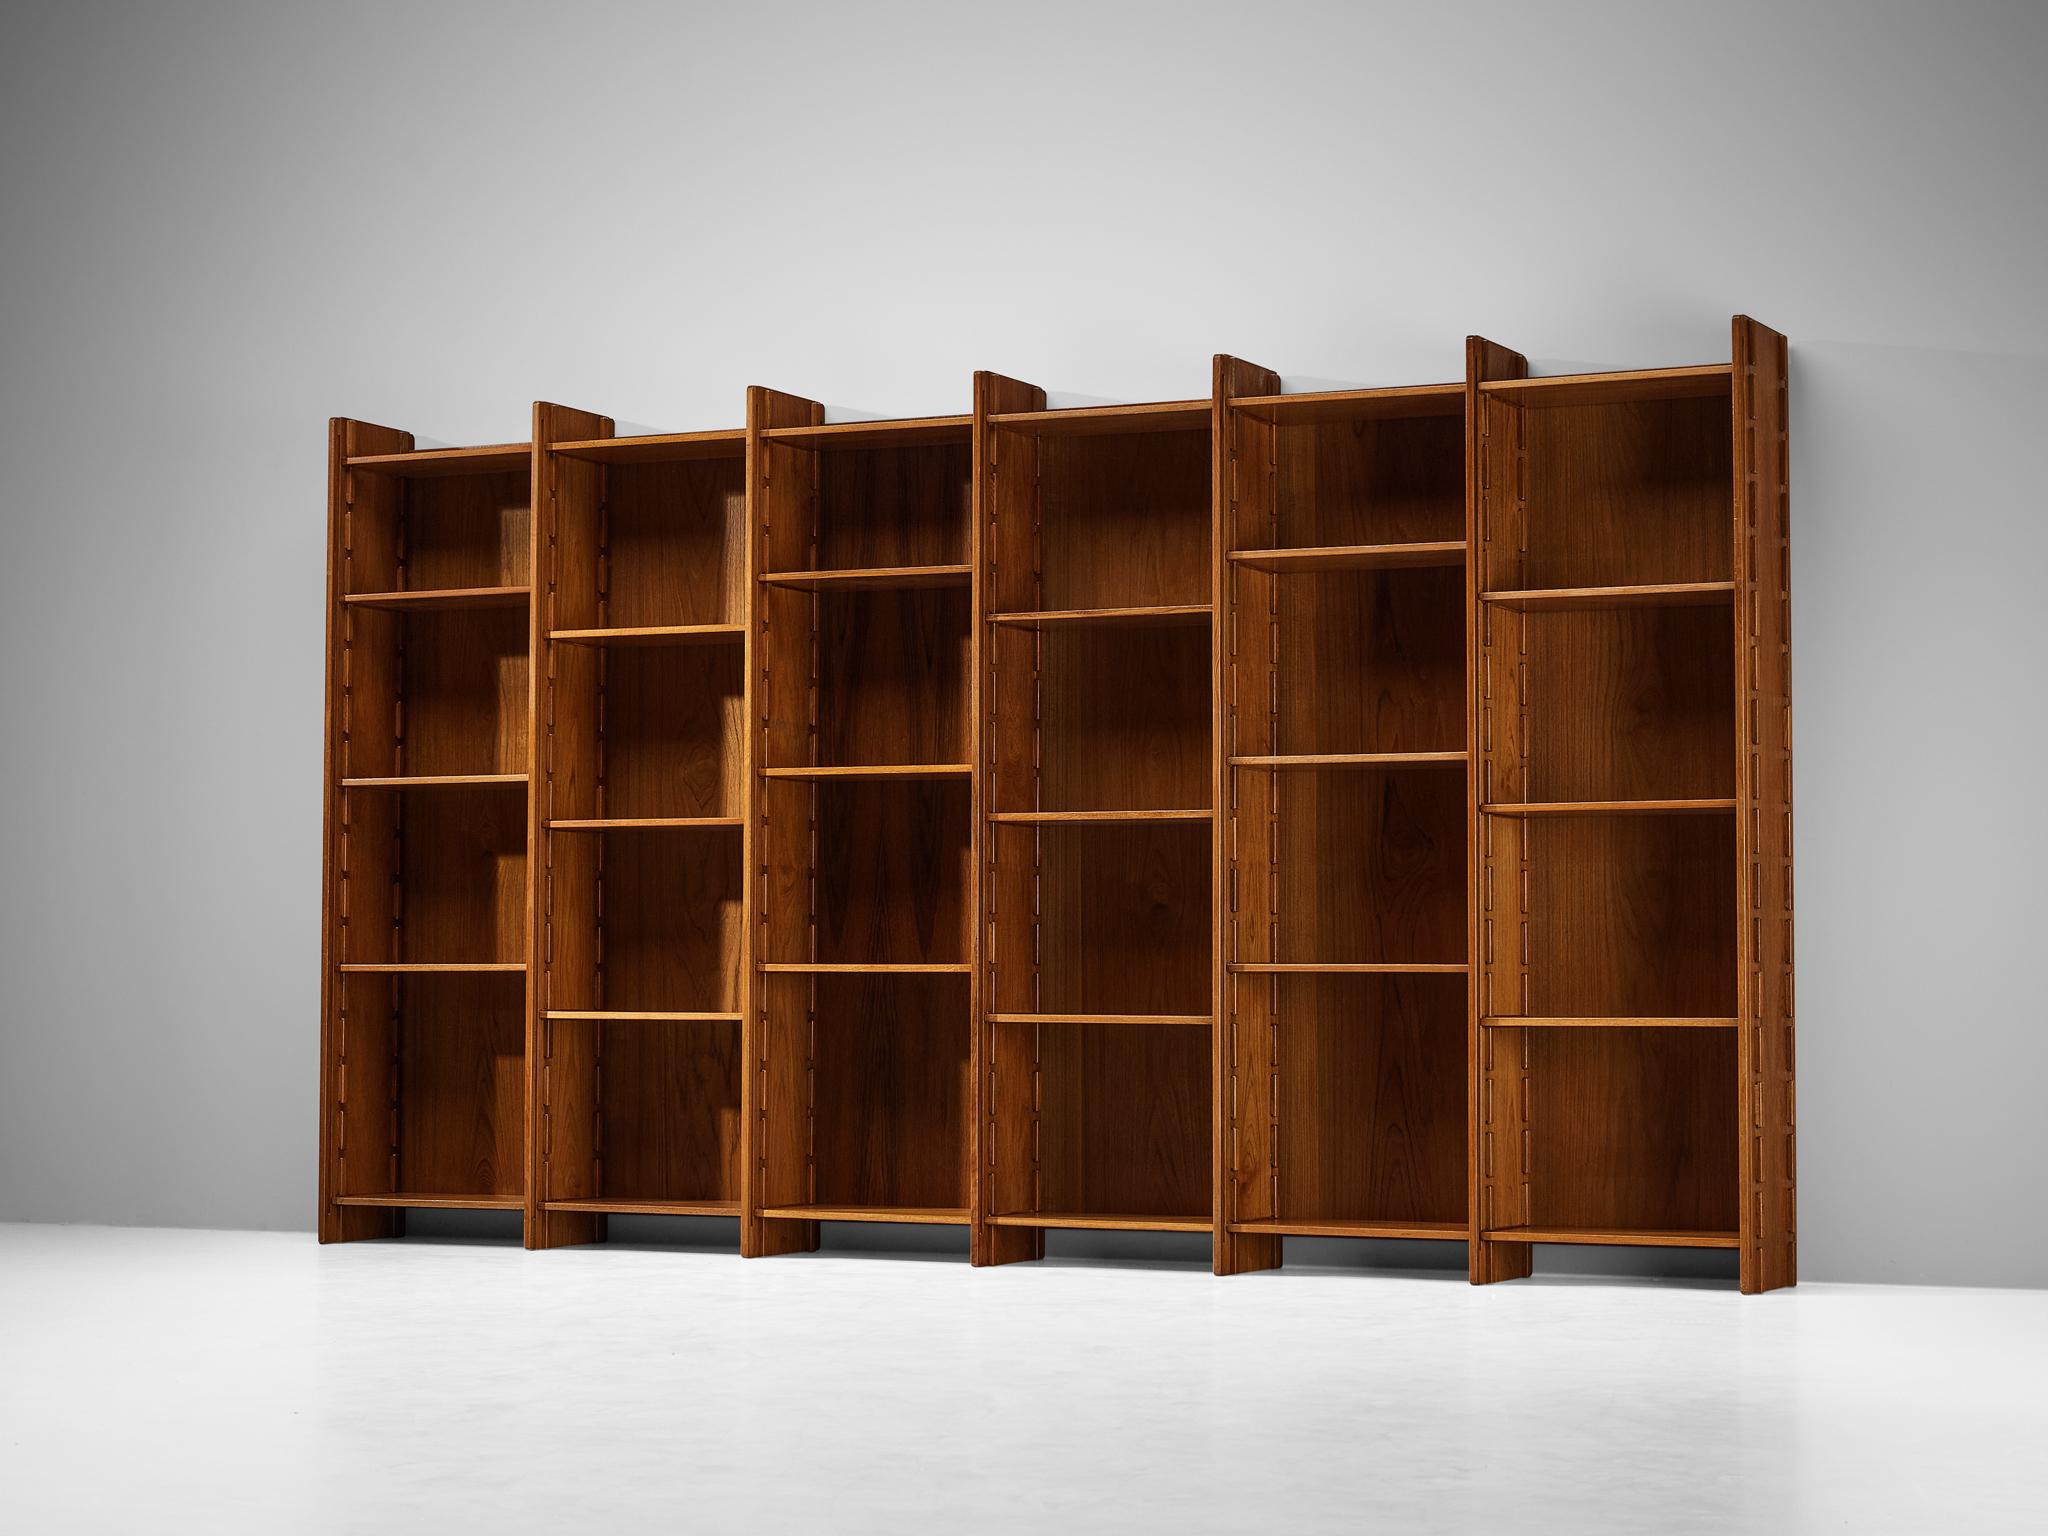 Gianfranco Frattini for Bernini, bookcase / wall unit, model '540', teak, Italy, 1960.

This library unit is designed by Italian designer Gianfranco Frattini and offers plenty of storage space. The sophisticated composition is based on six